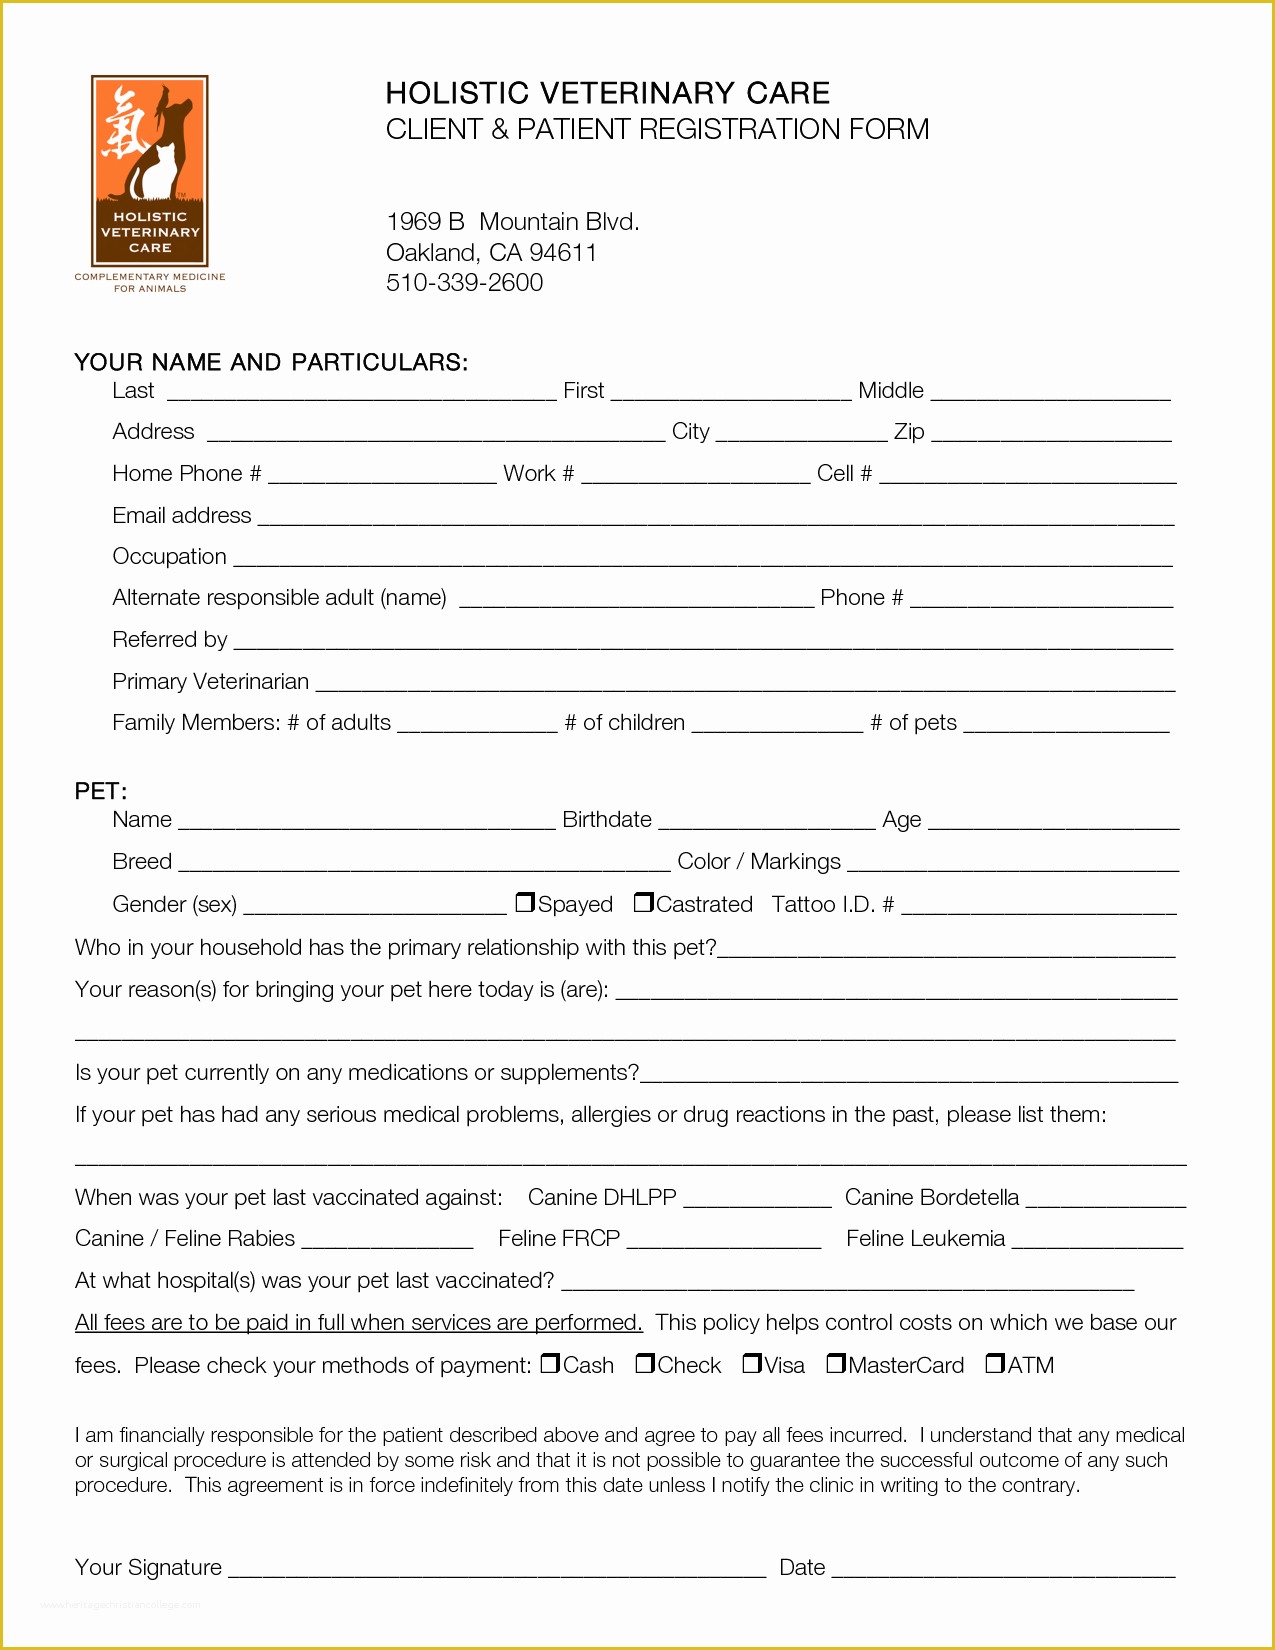 Free Patient Registration form Template Of Best S Of Printable Patient Registration forms